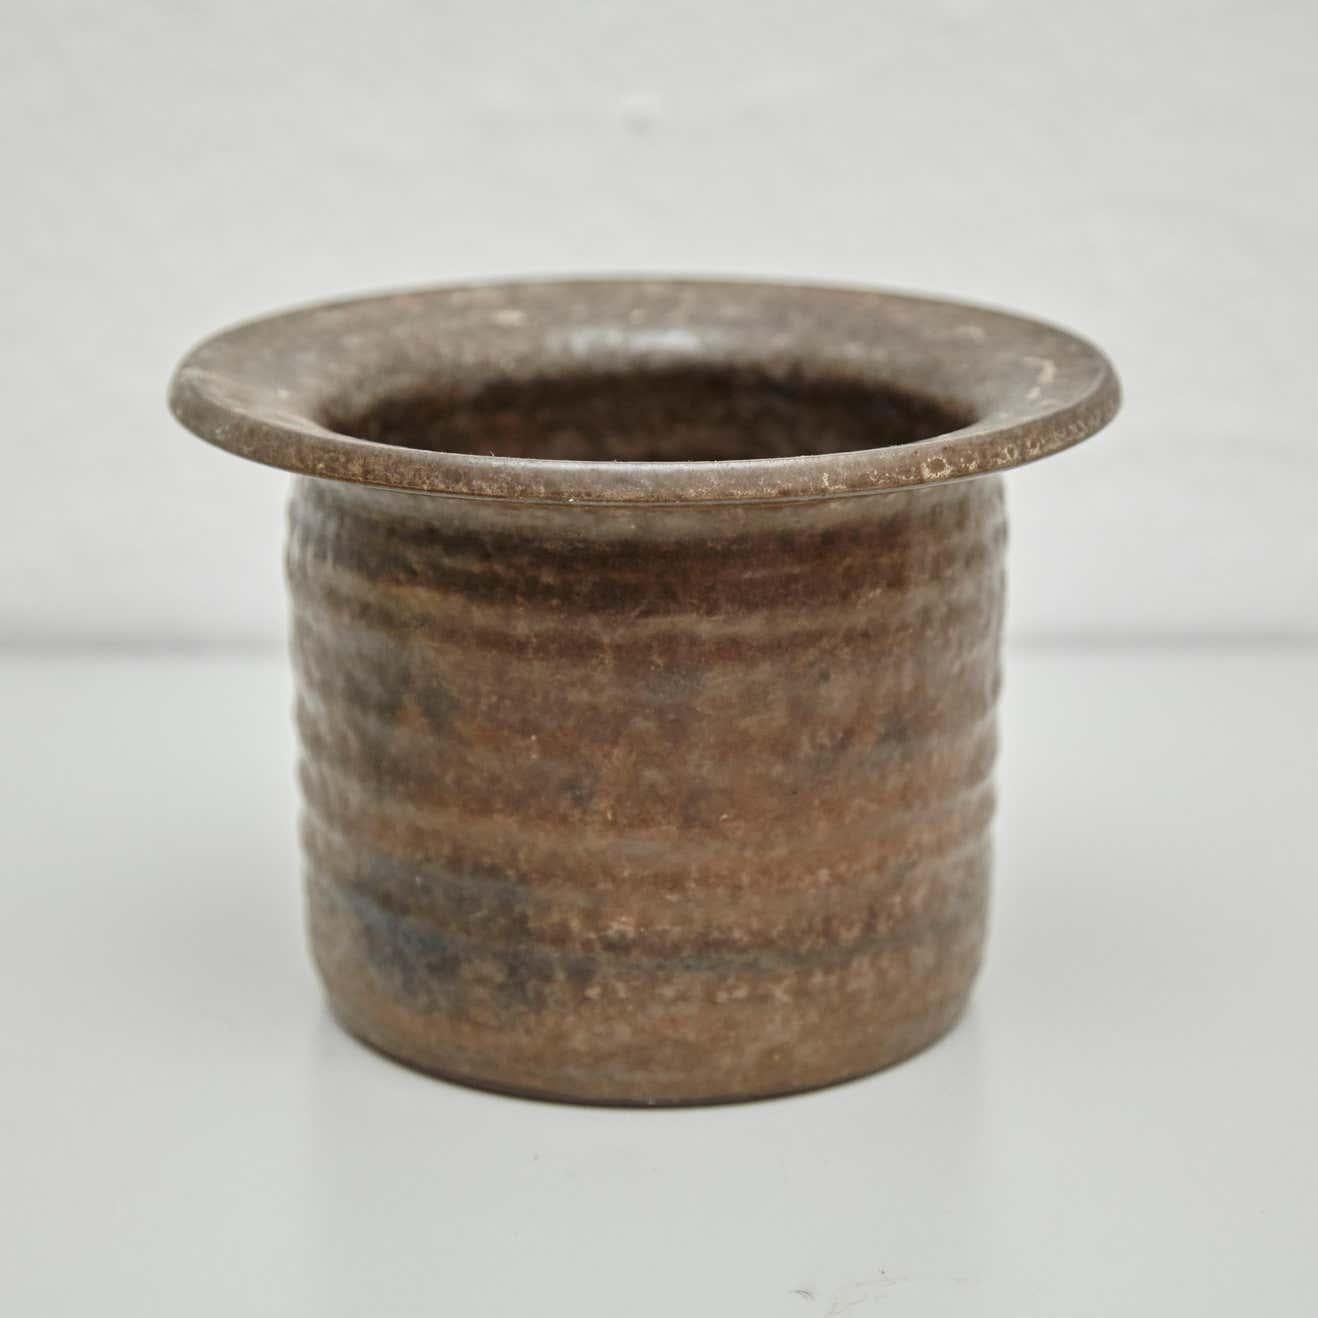 20th century popular traditional ceramic.
By unknown artisan, France.
In original condition, with minor wear consistent with age and use, preserving a beautiful patina.

Materials:
Ceramic

Dimensions:
ø 16 cm x H 11.5 cm.